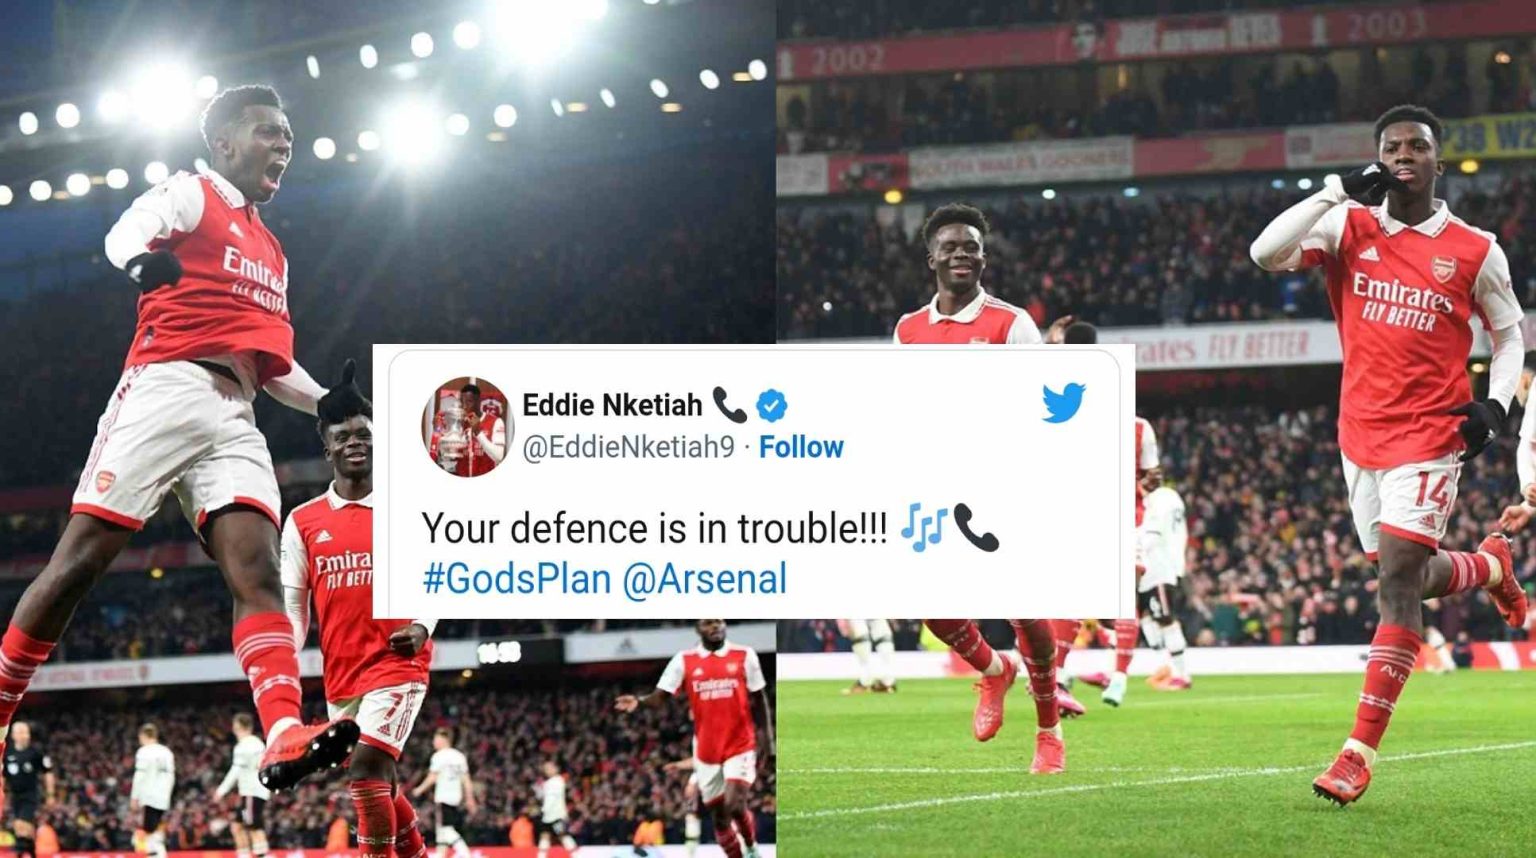 'Your defense is in trouble': Eddie Nketia mocks Manchester United after scoring late minute winner